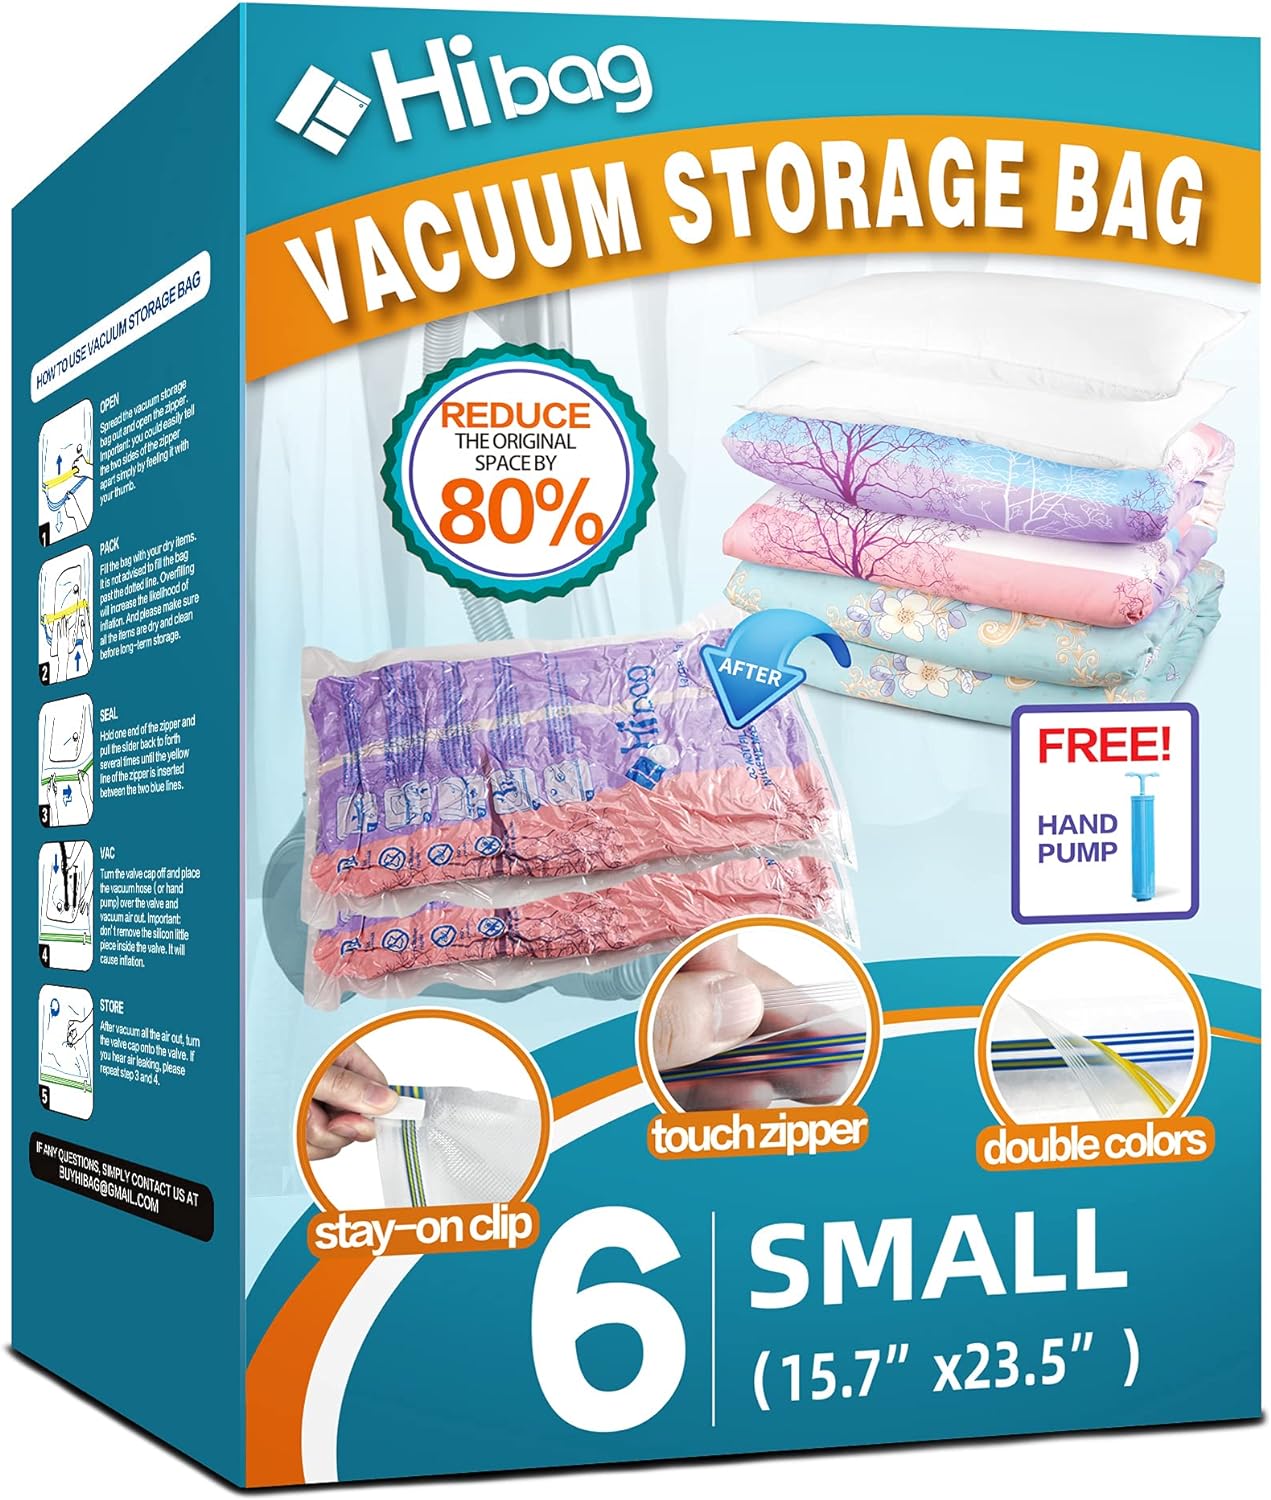 HiBag XXL vacuum storage bags are the perfect solution for storing bulky items like comforters, blankets, and pillows.